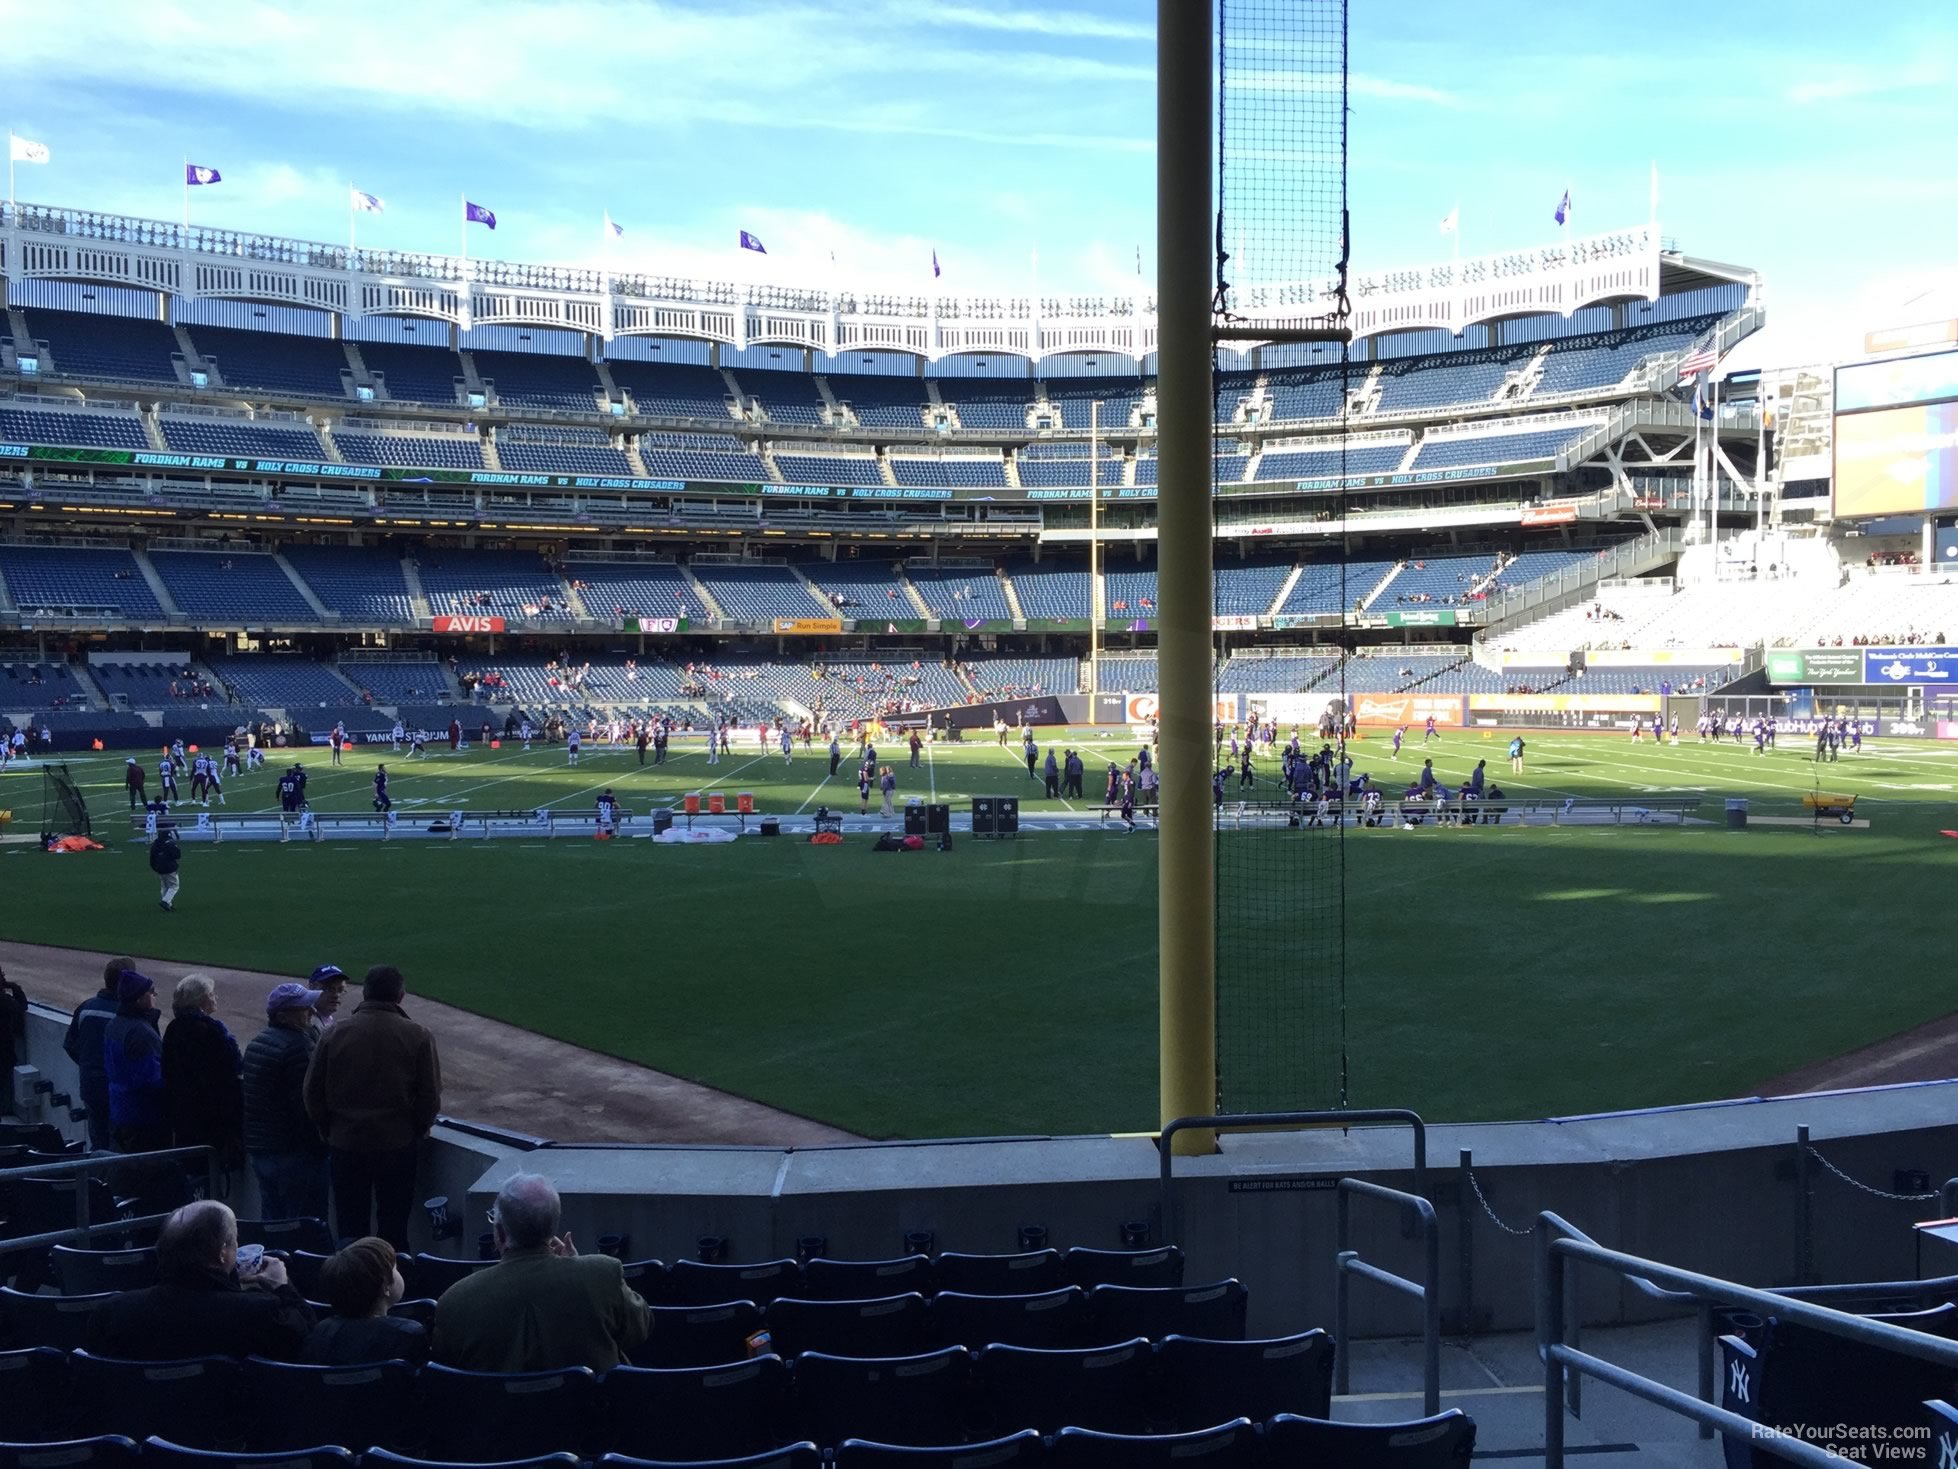 section 108, row 10 seat view  for football - yankee stadium